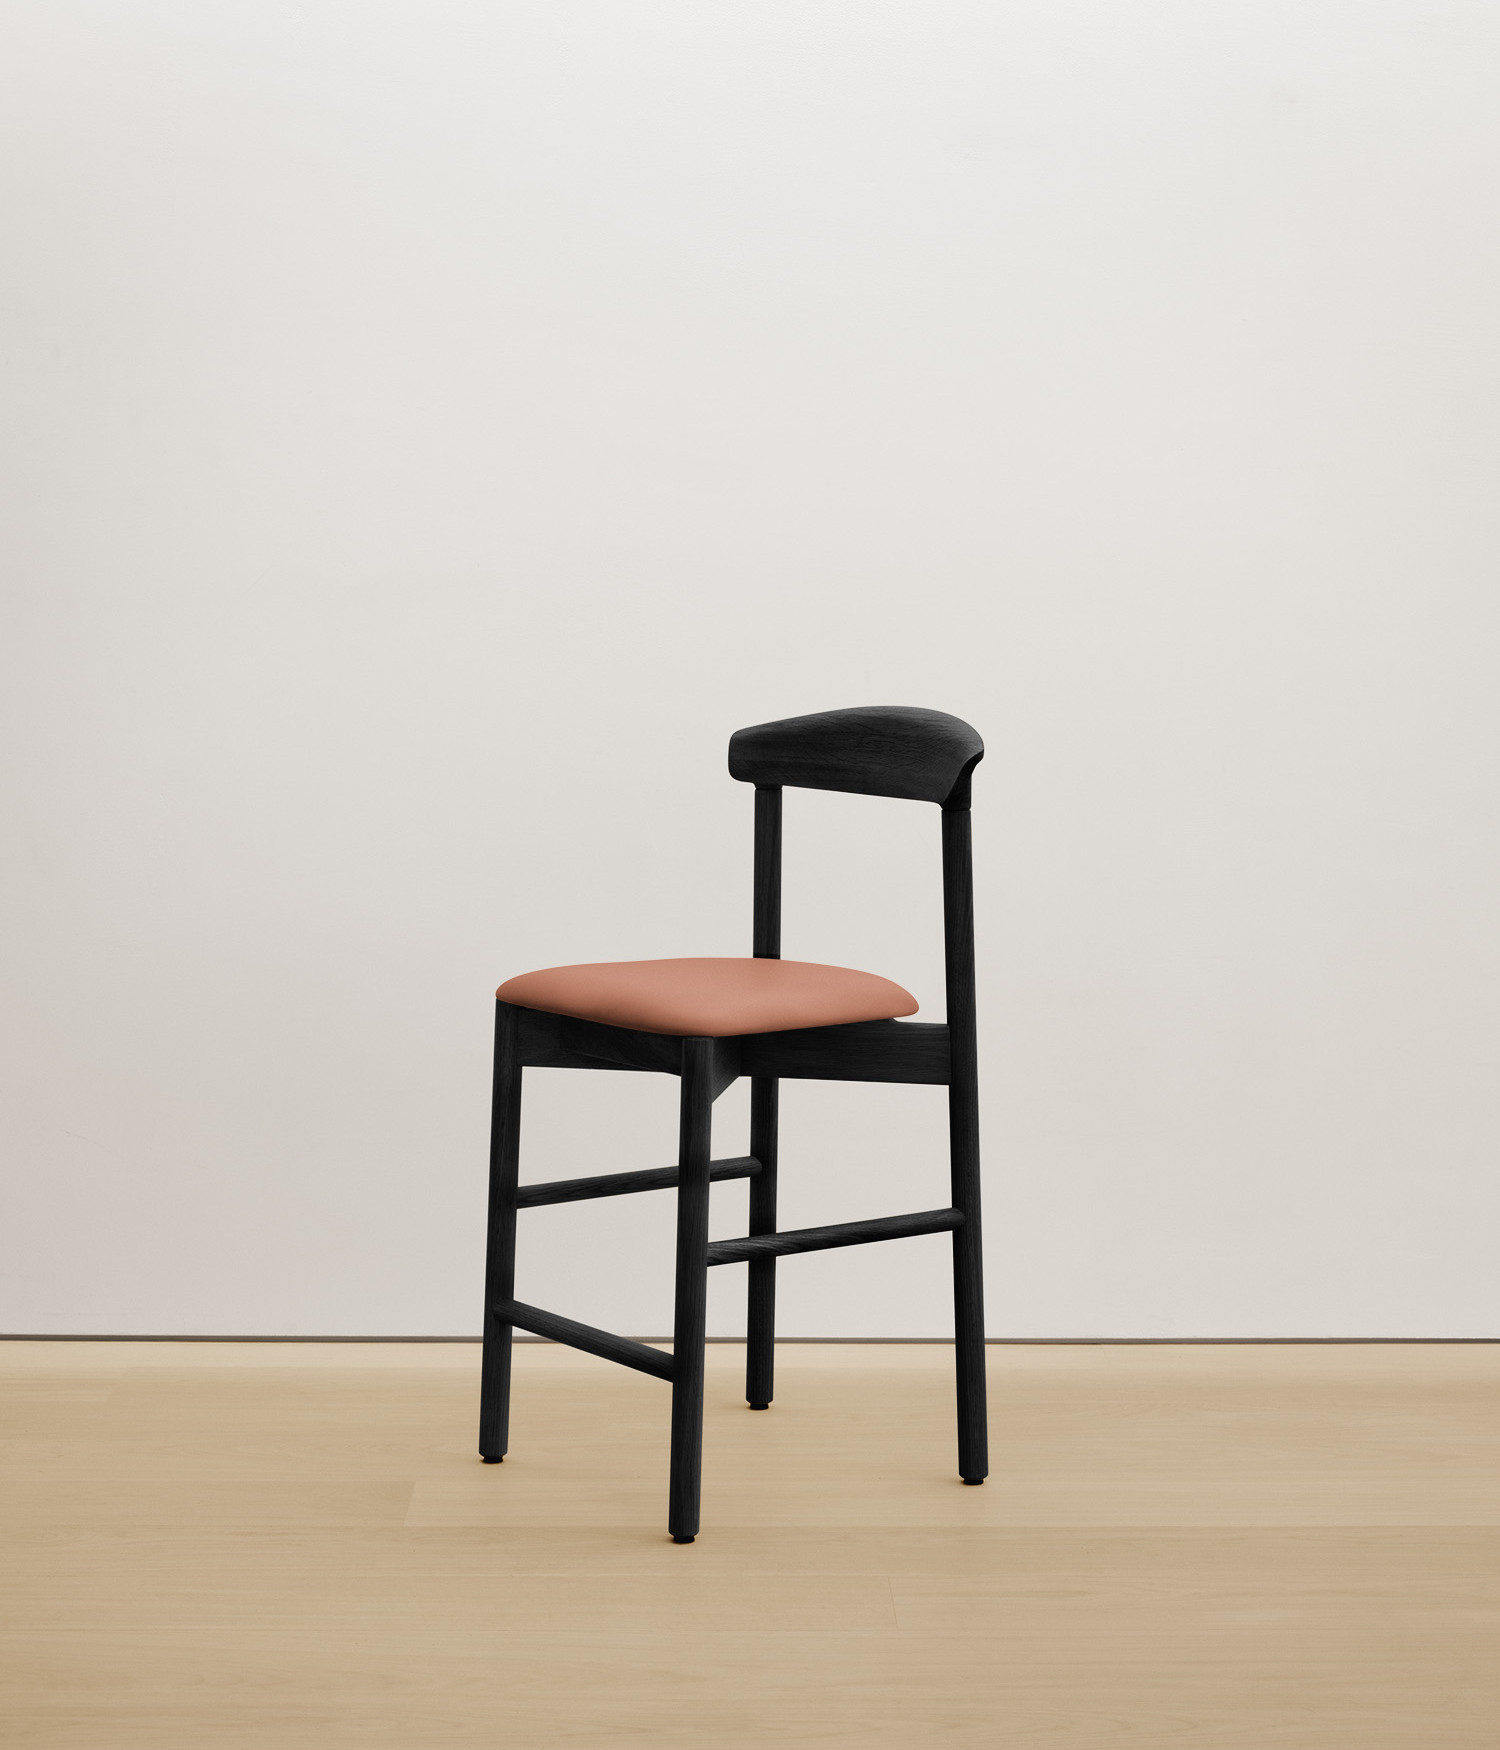  black-stained-oak stool with clay color upholstered seat